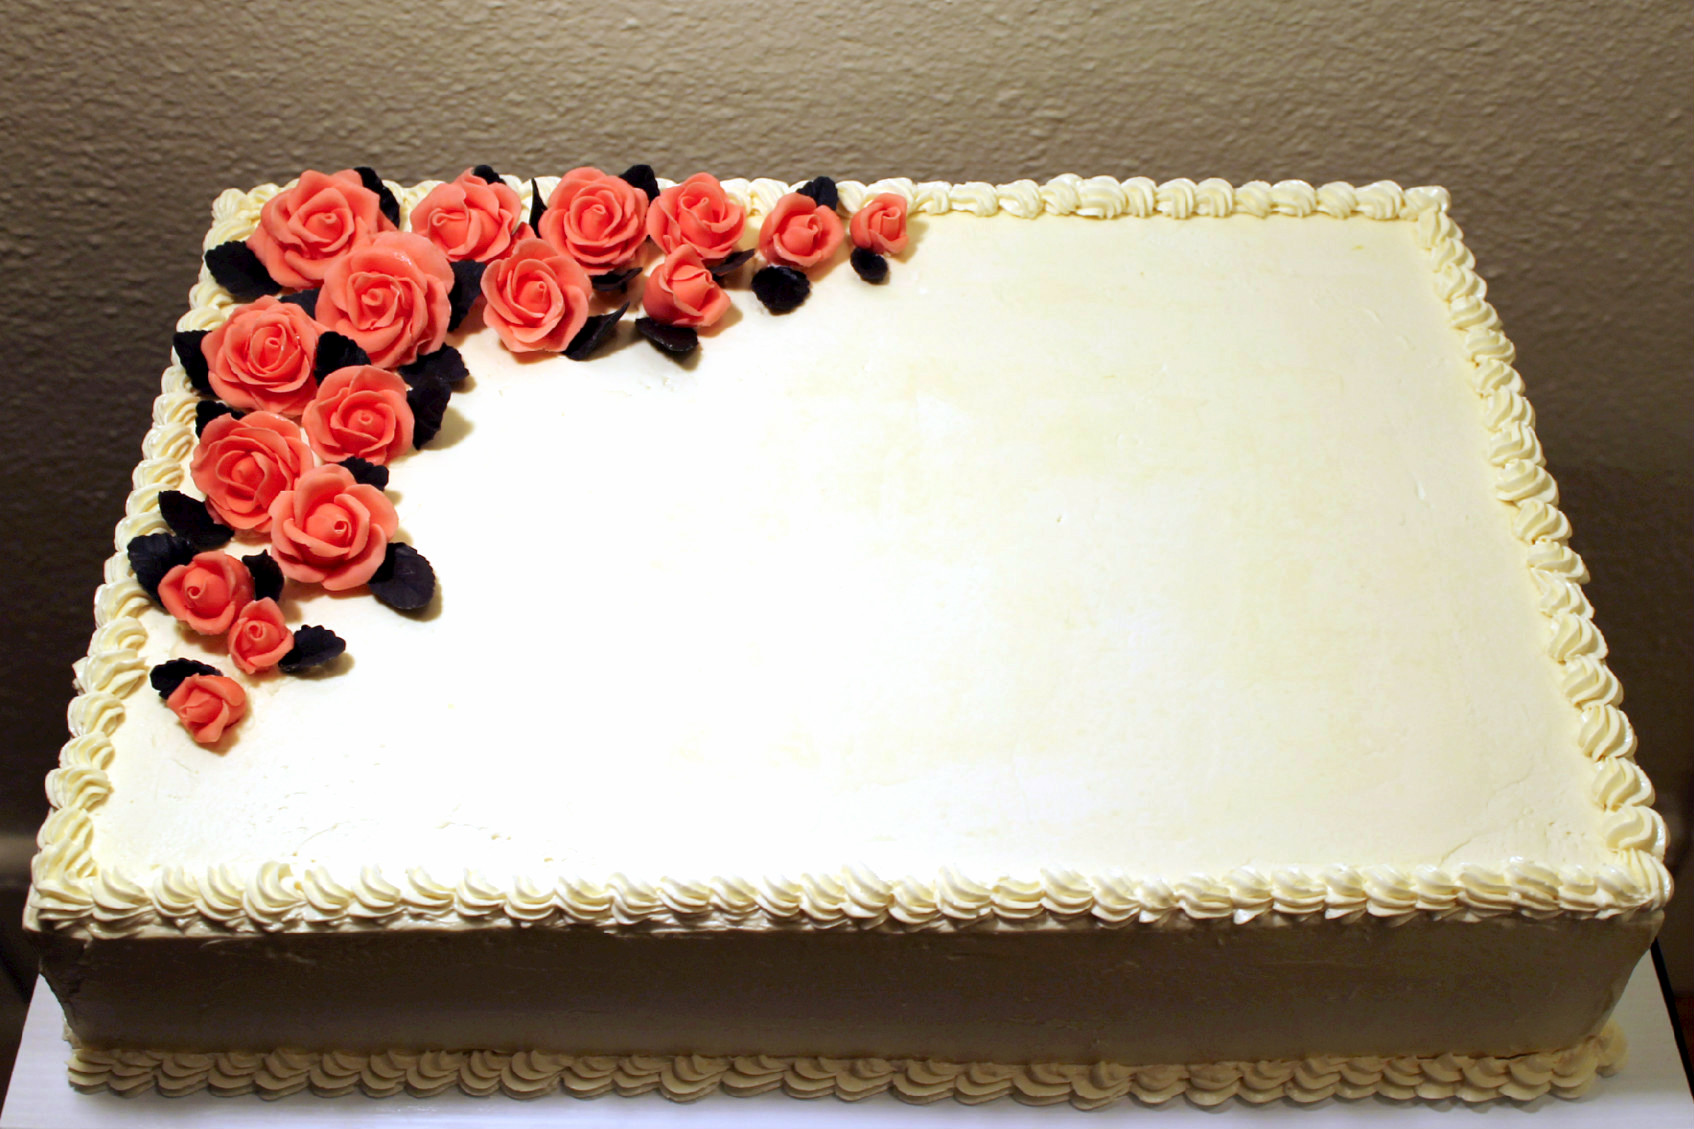 Sheet Cakes with Roses